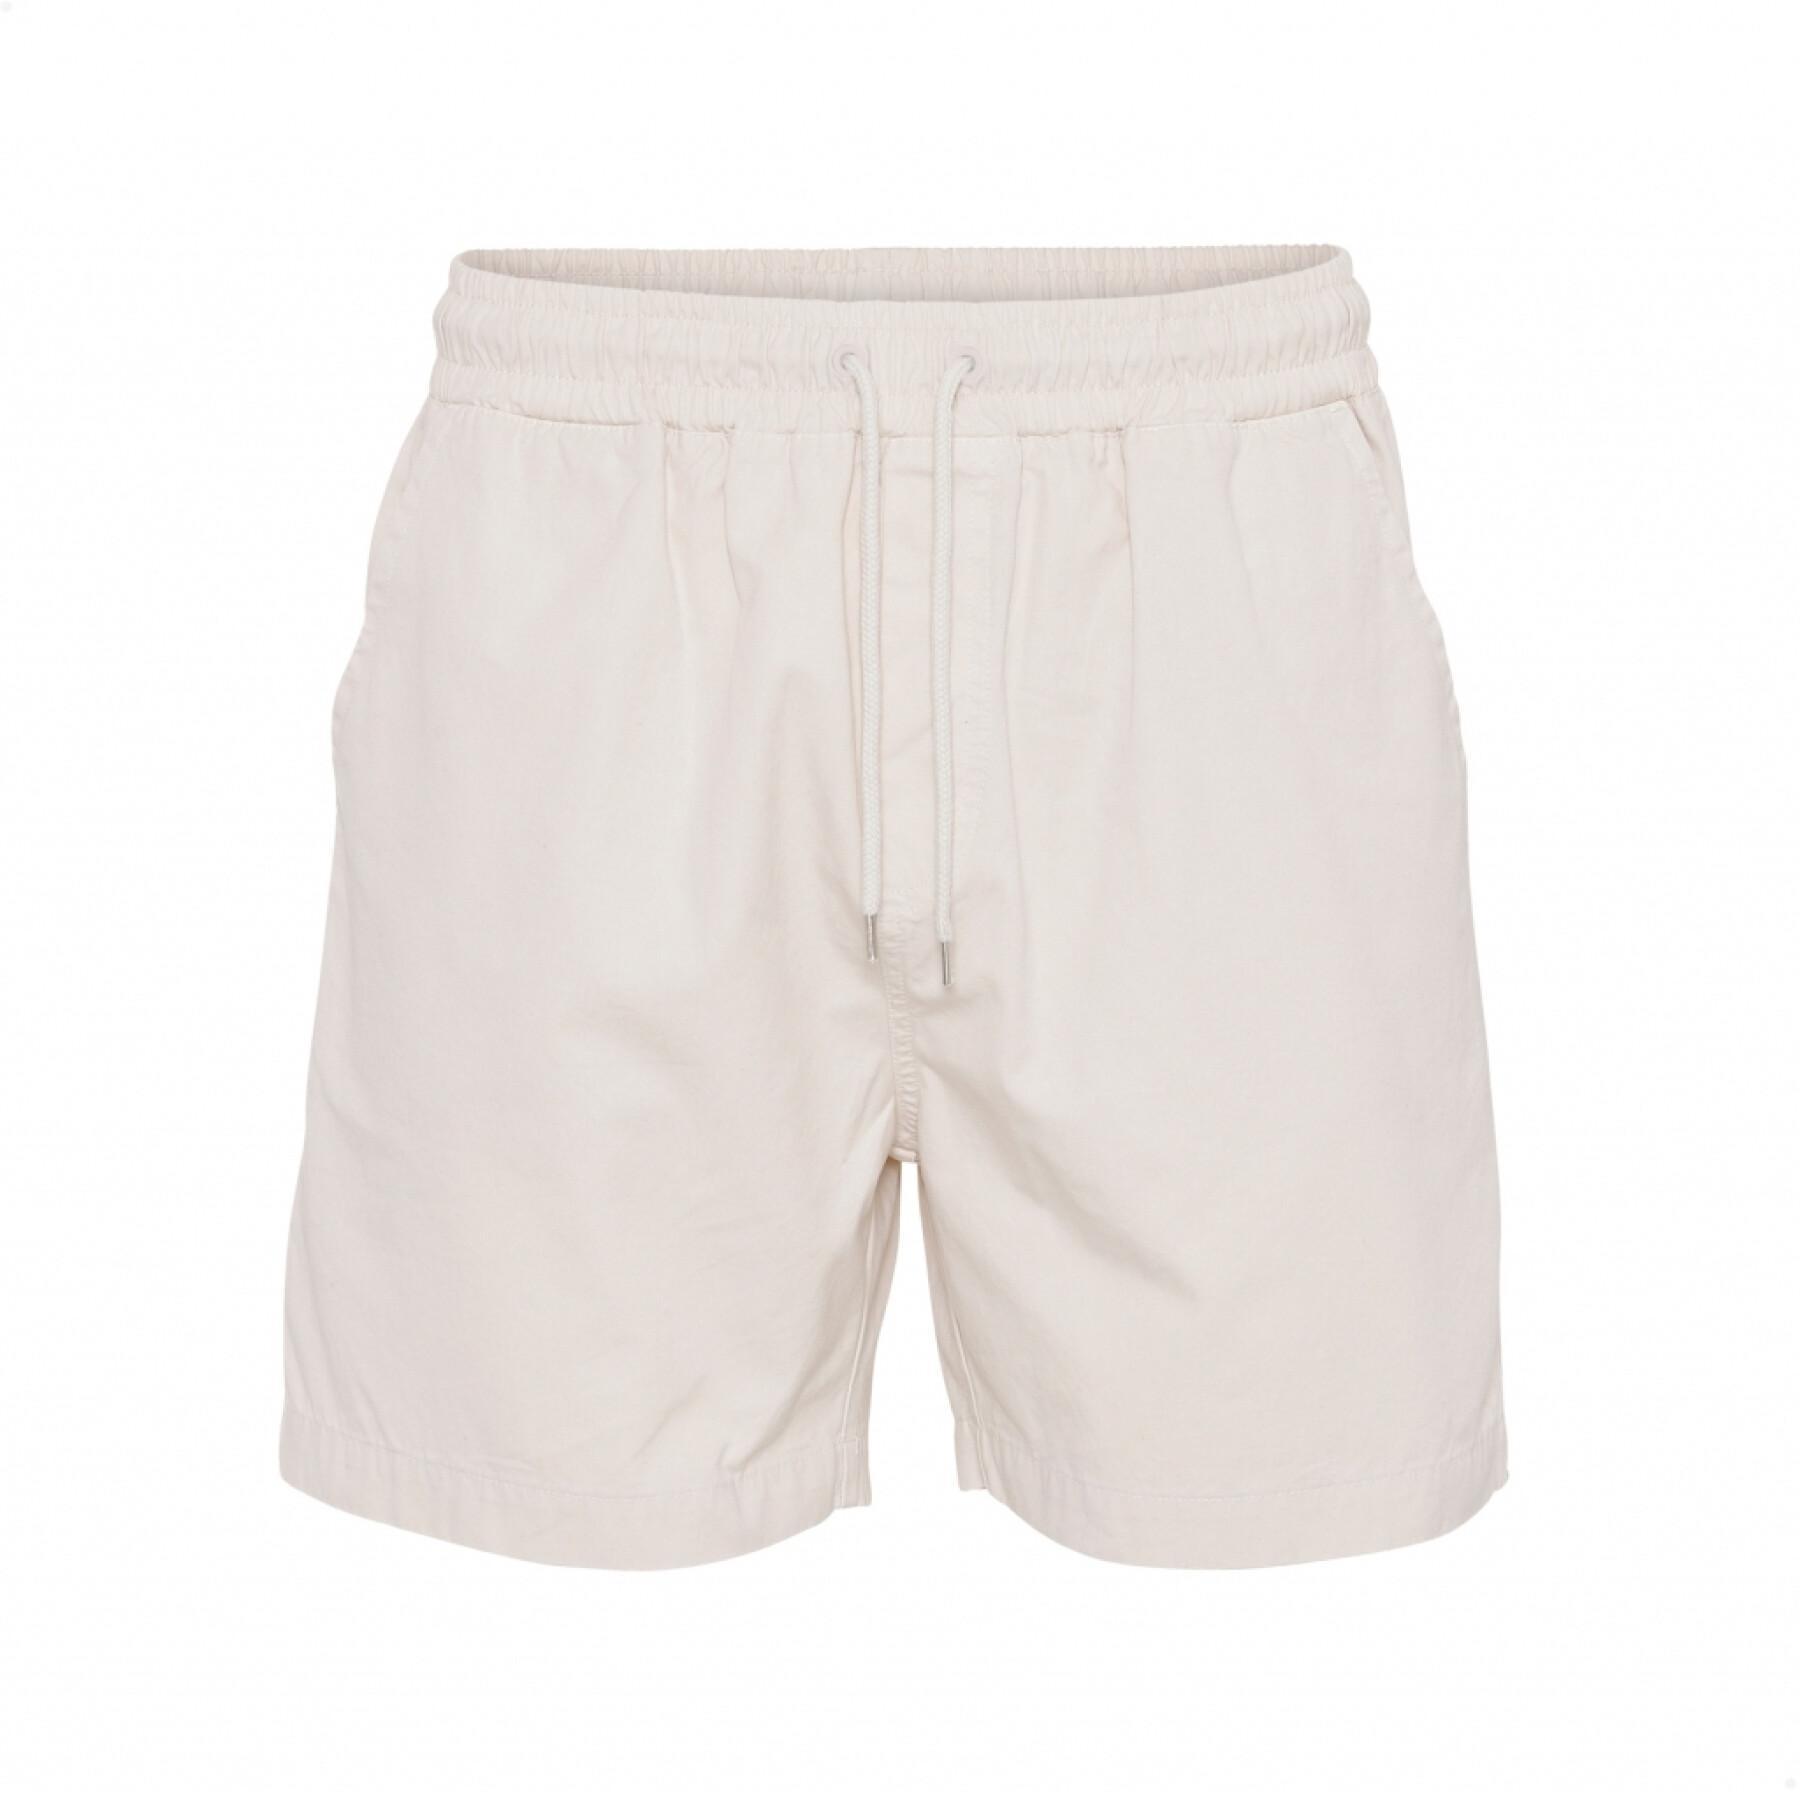 Pantaloncini in twill Colorful Standard Organic ivory white